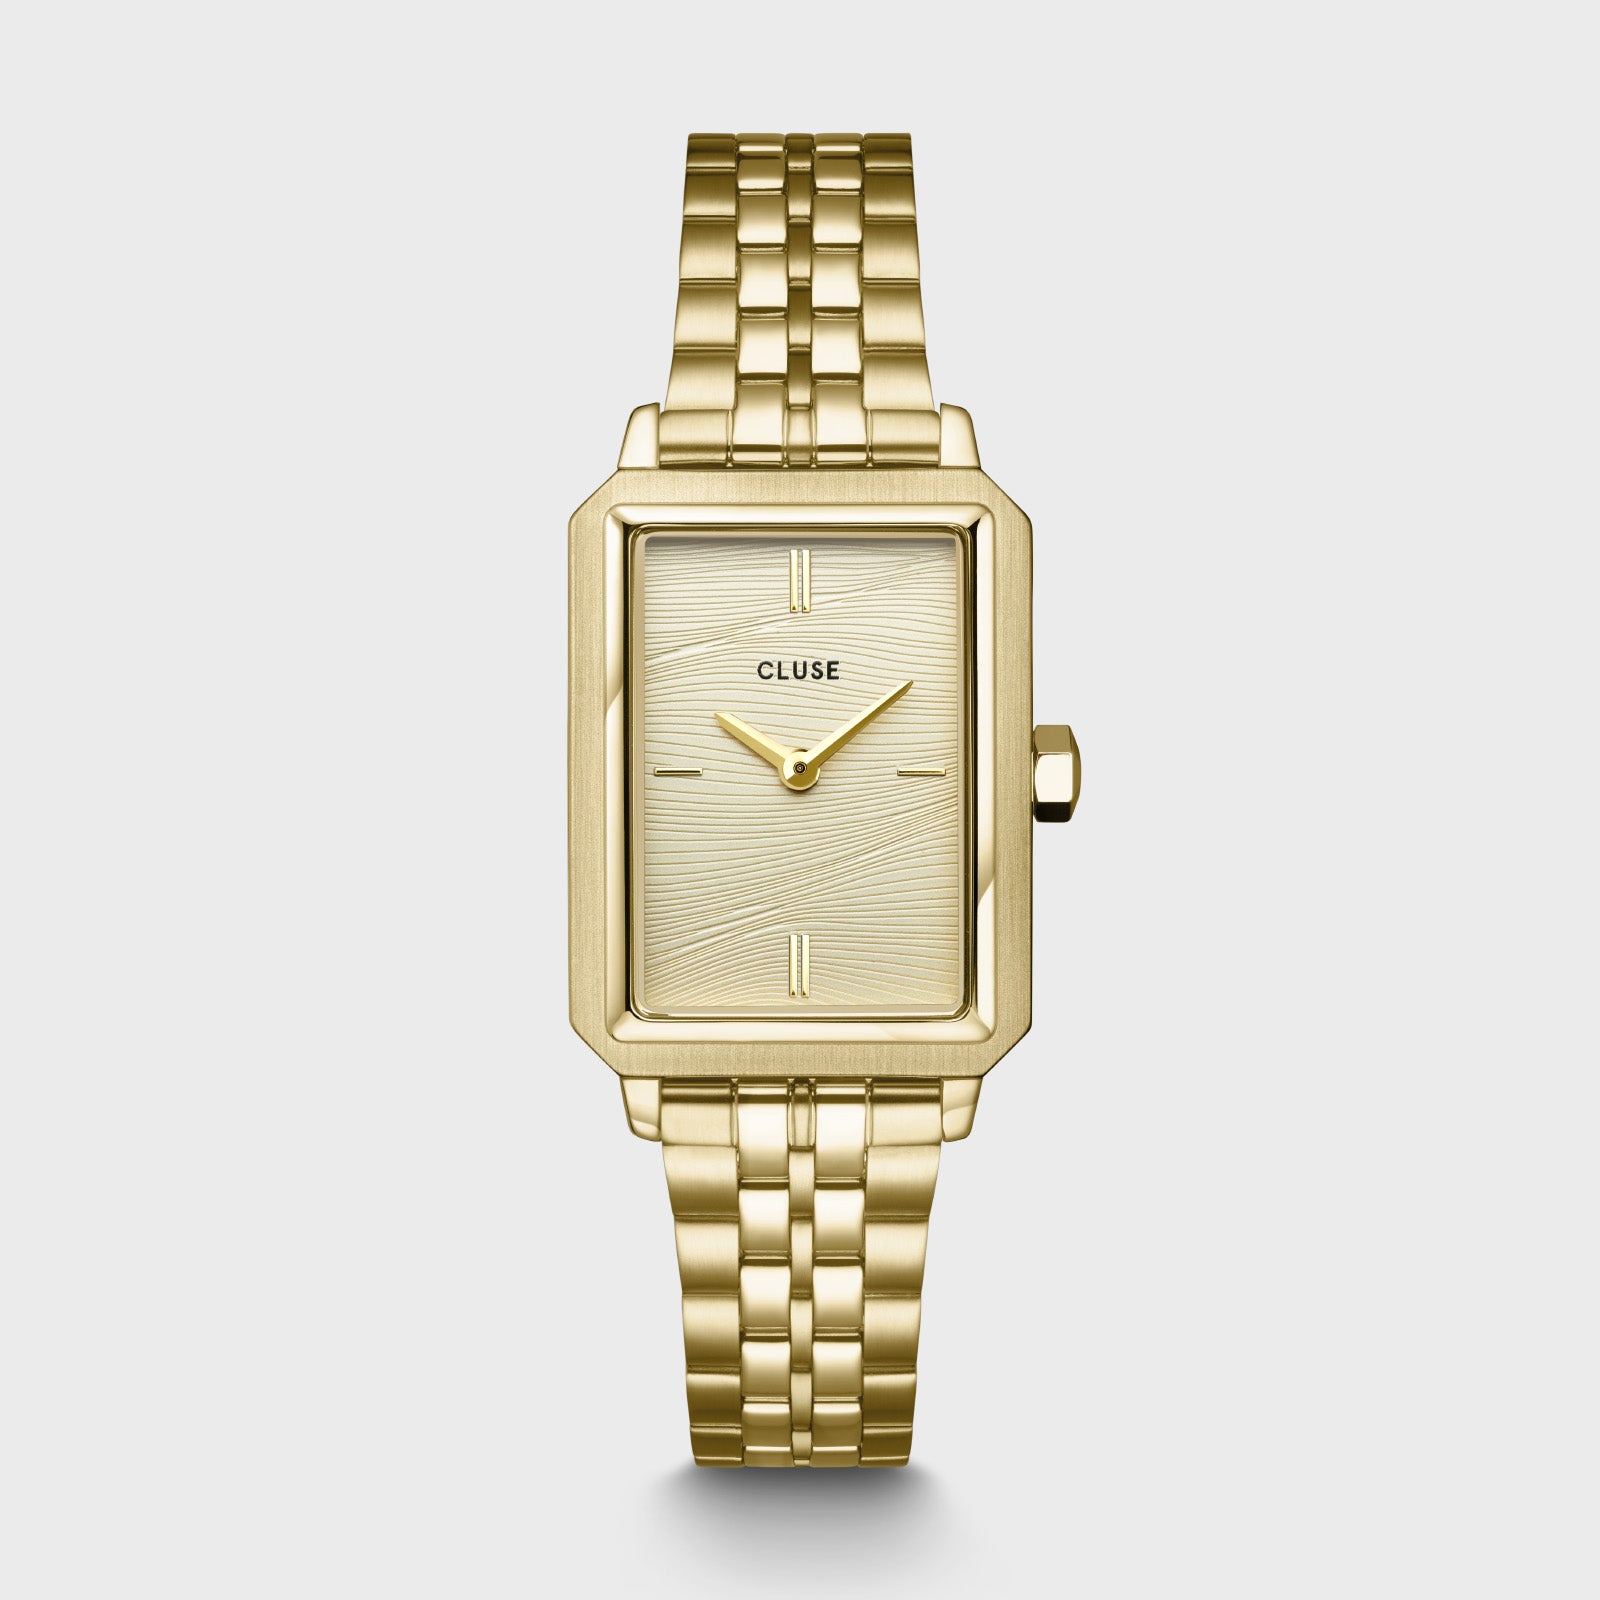 CLUSE Gold Watches For Women • Official CLUSE Store